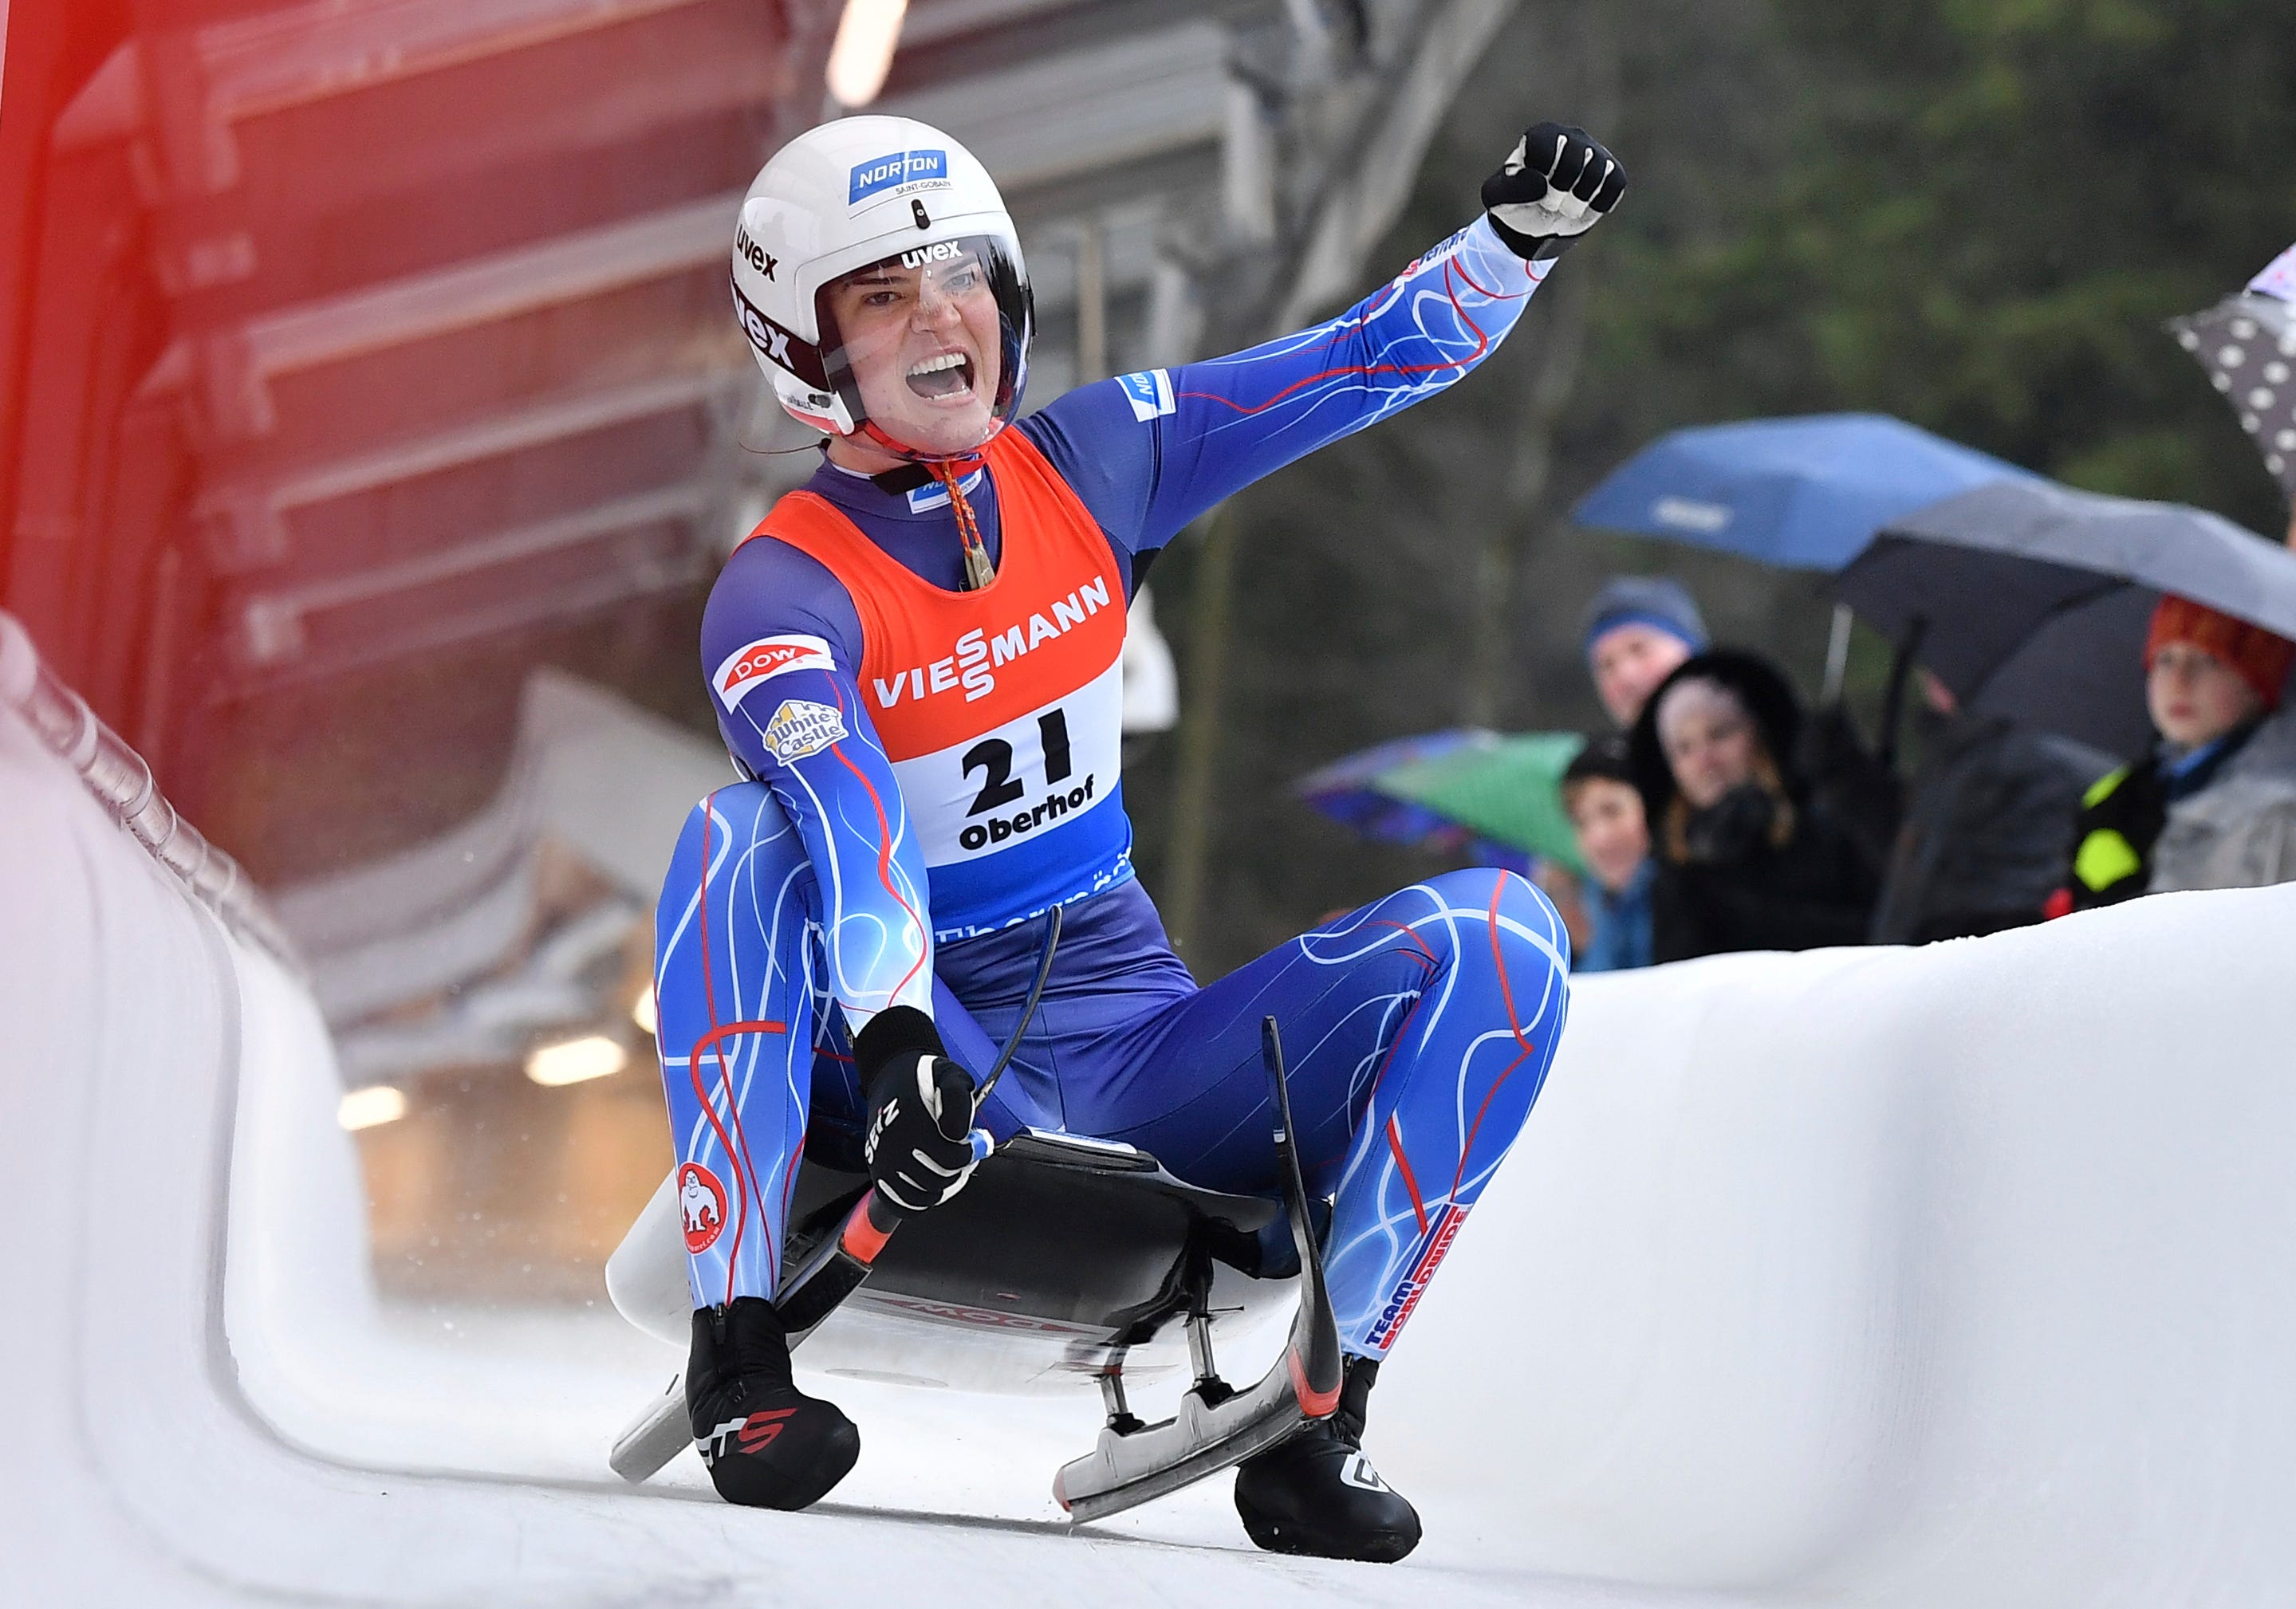 Summer Britcher of Glen Rock, Pennsylvania, cheers at the finish line after finishing third at the luge world cup in Oberhof, Germany, Sunday, Feb.2, 2020.